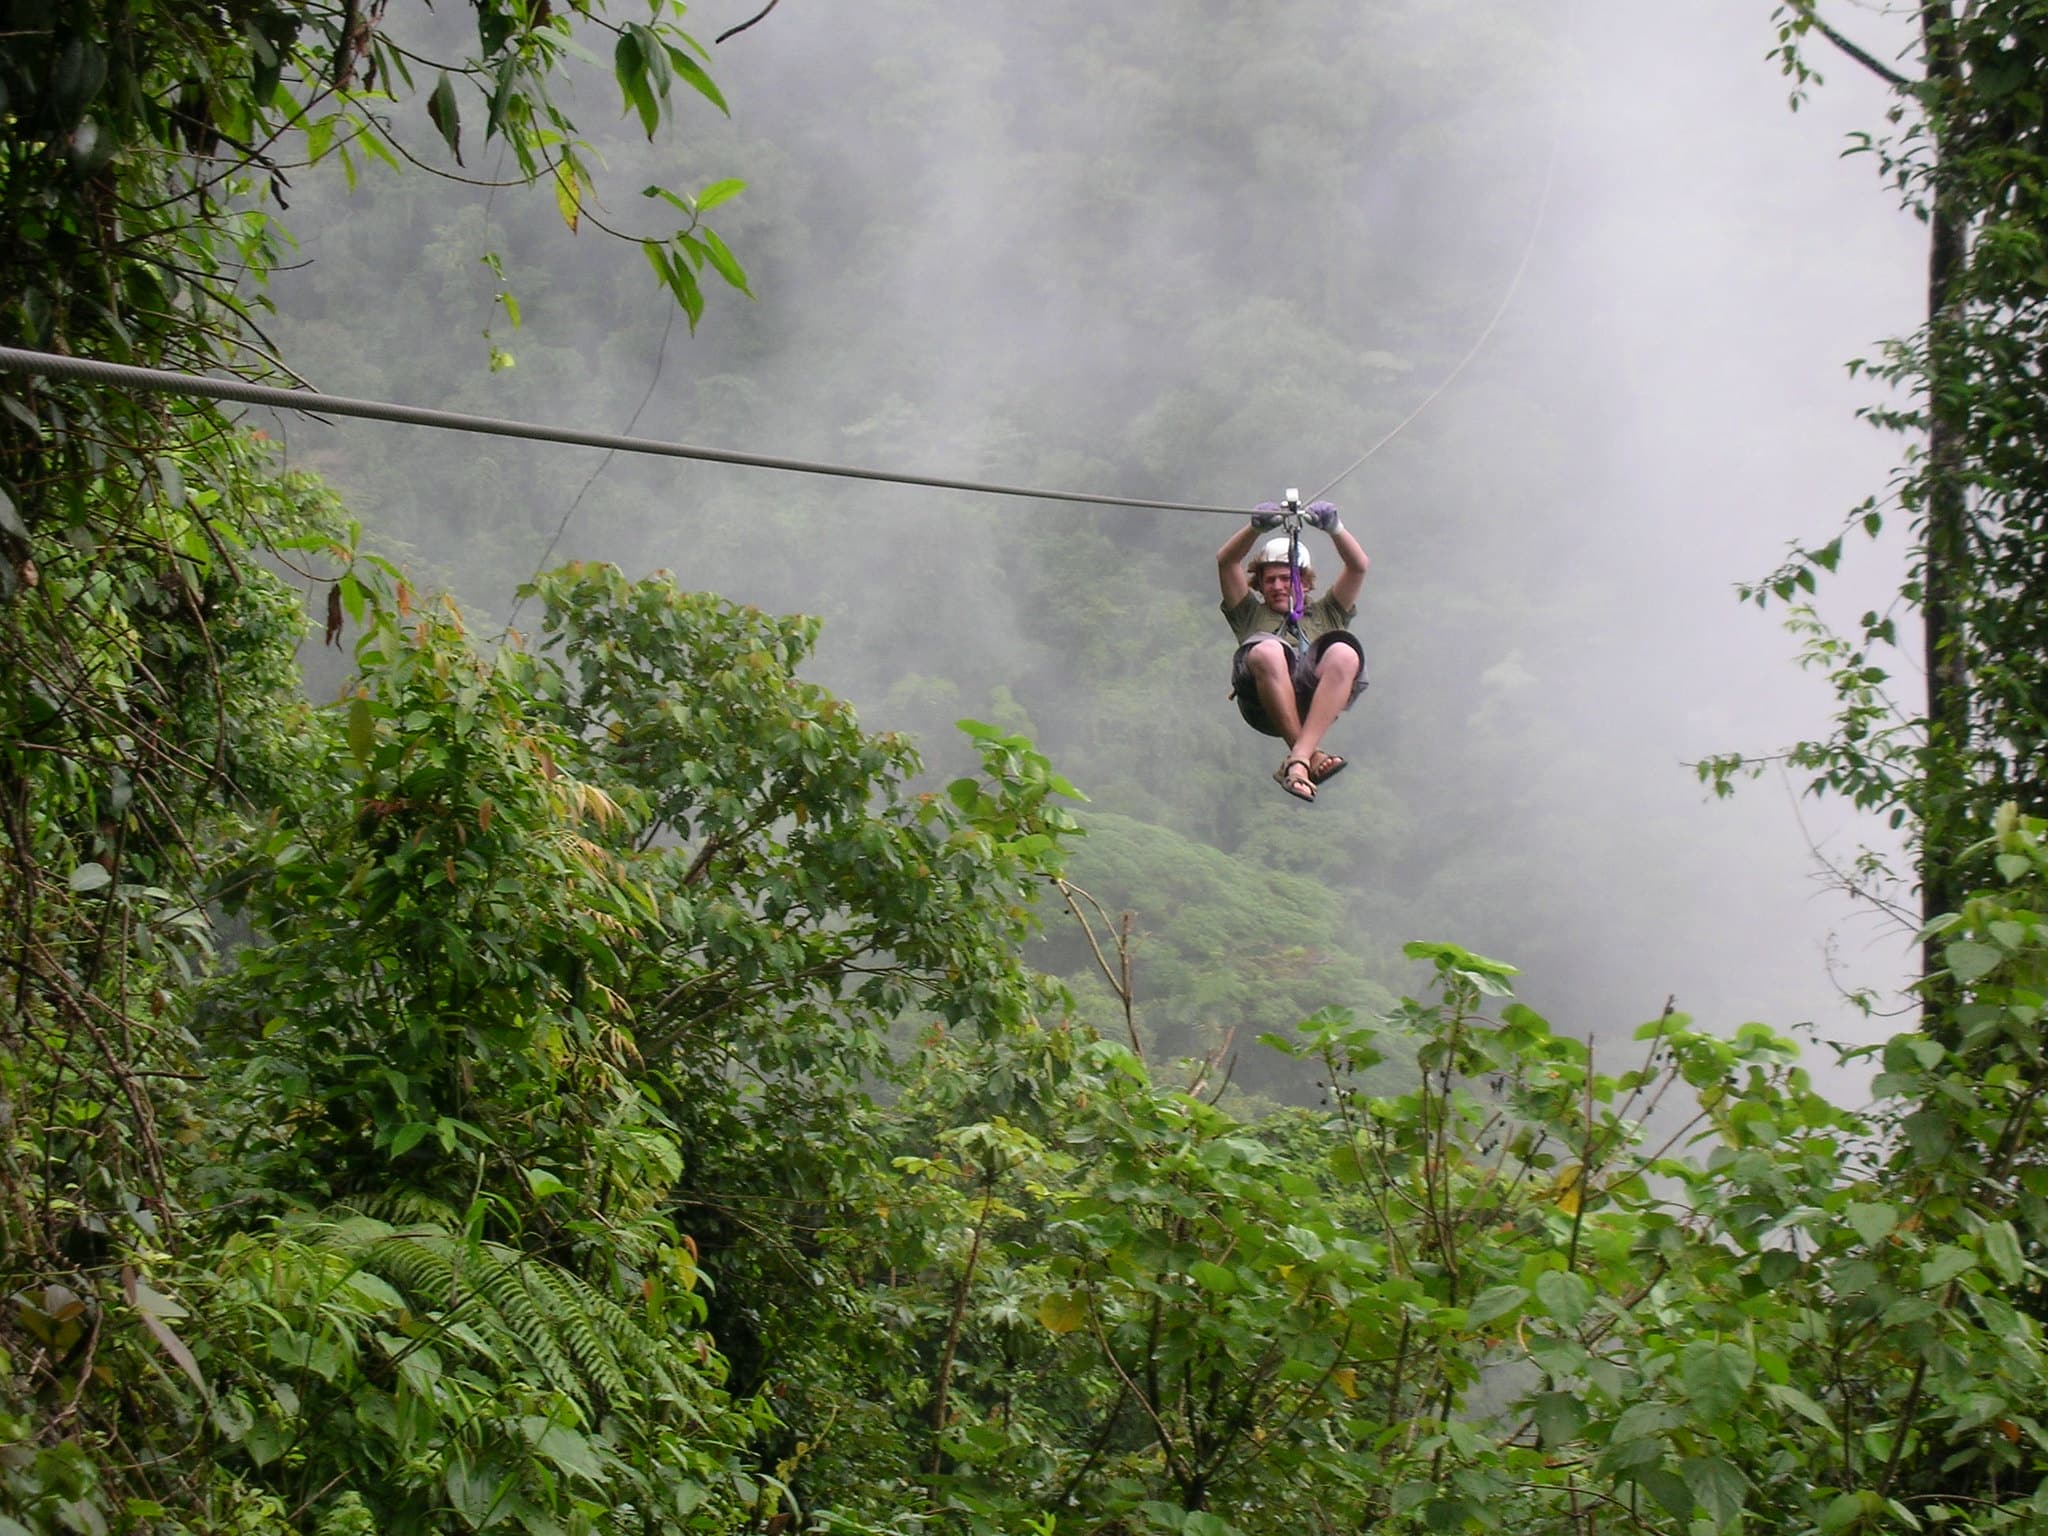 Canopy Tours